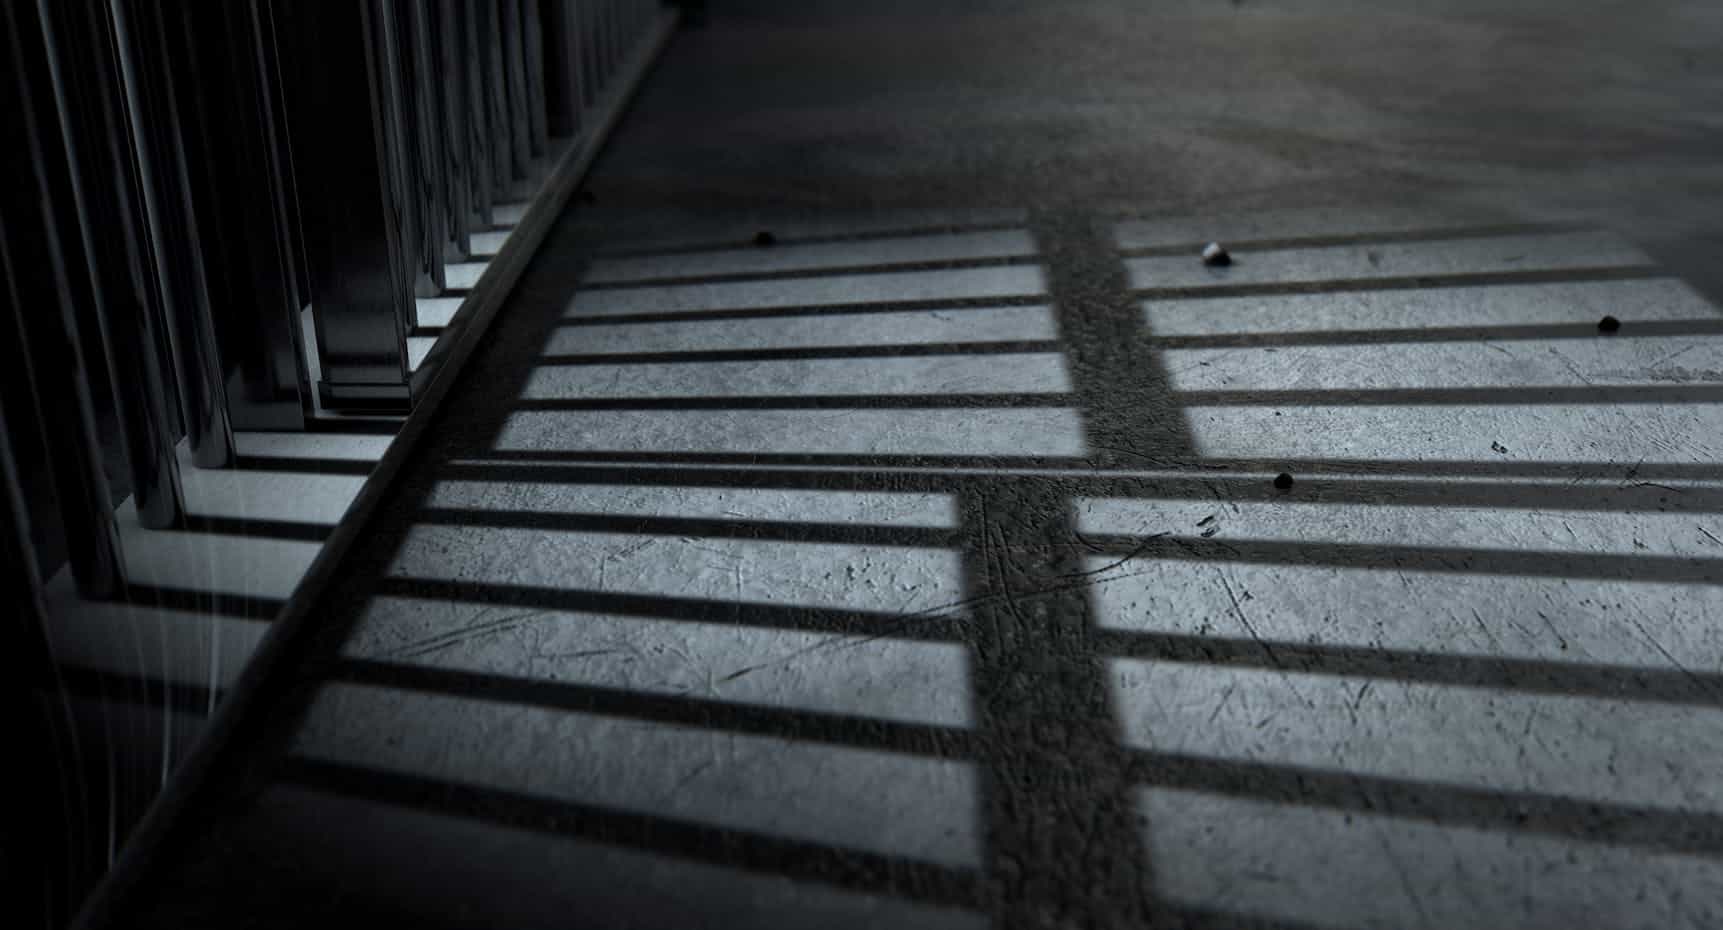 The shadows of prison bars against a grey concrete floor